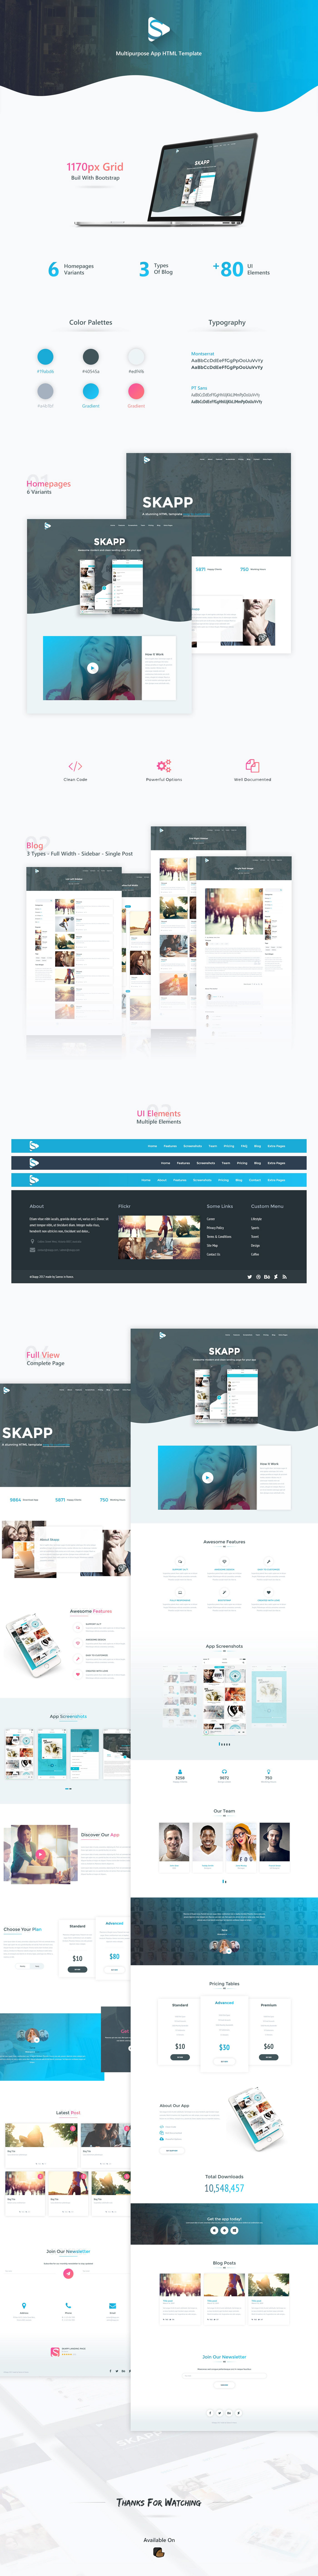 app landing mobile Blog One Page showcase bootstrap Web creative